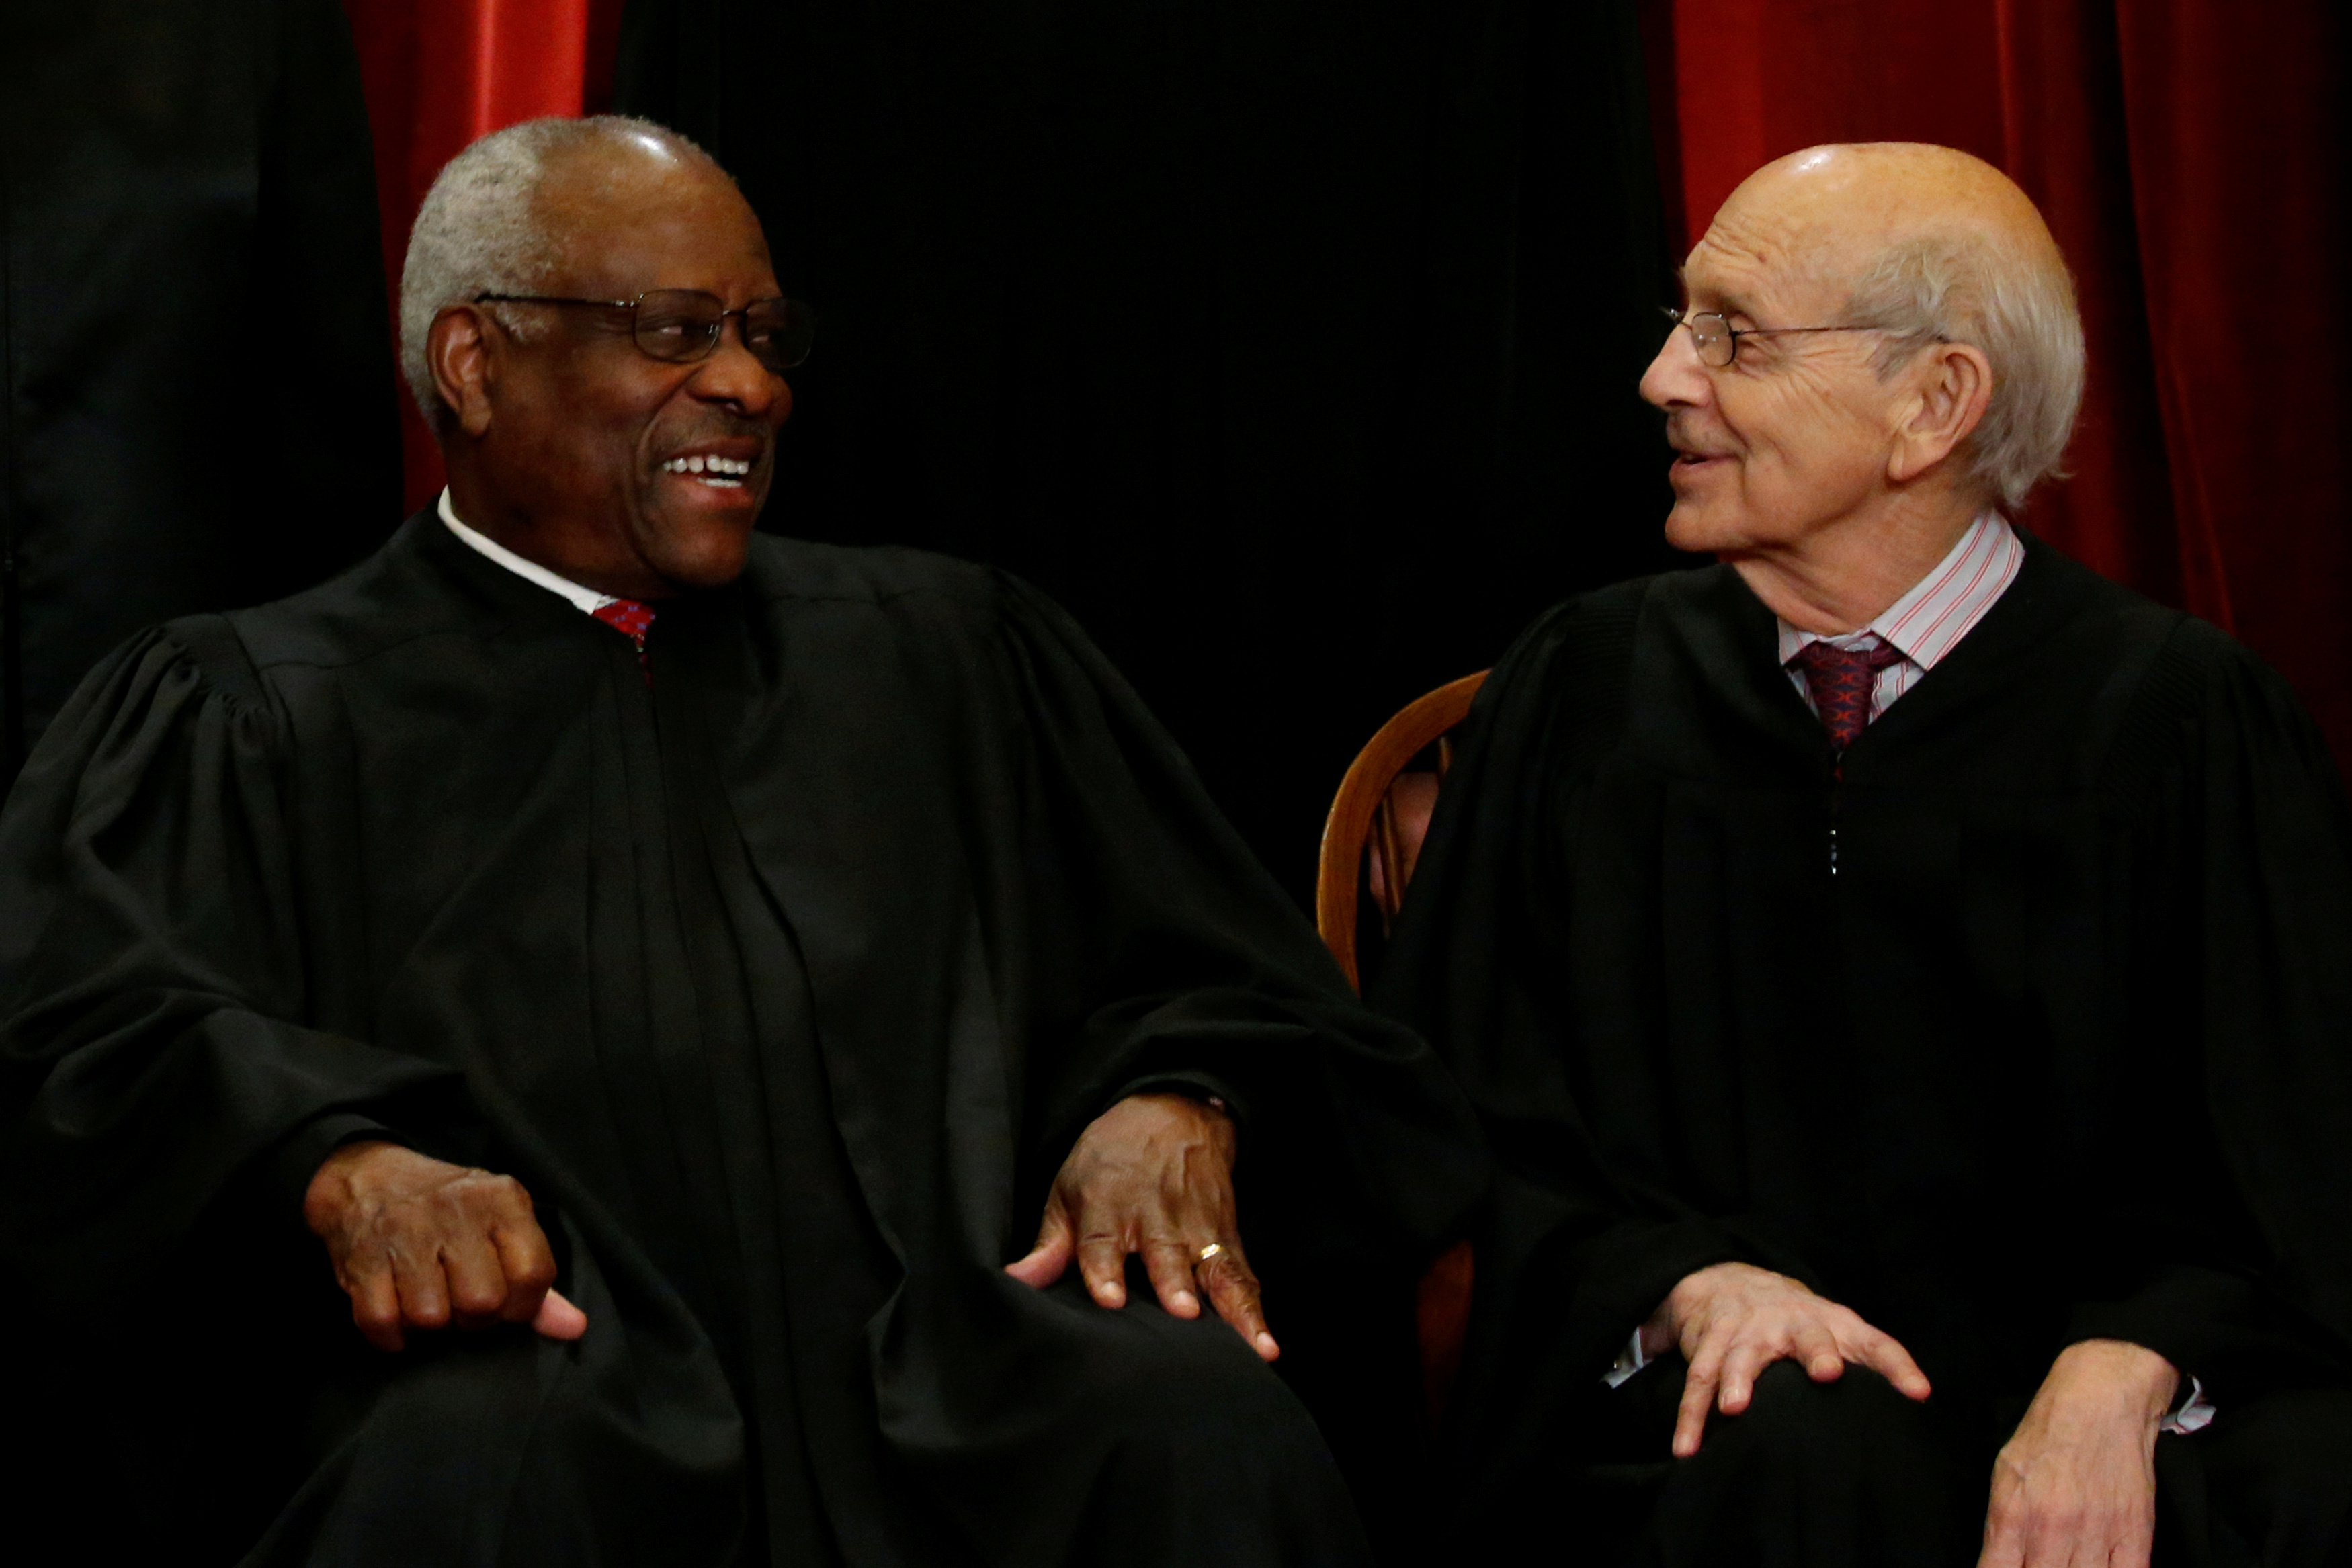 Thomas and Breyer chat during a new U.S. Supreme Court family photo at the Supreme Court building in Washington